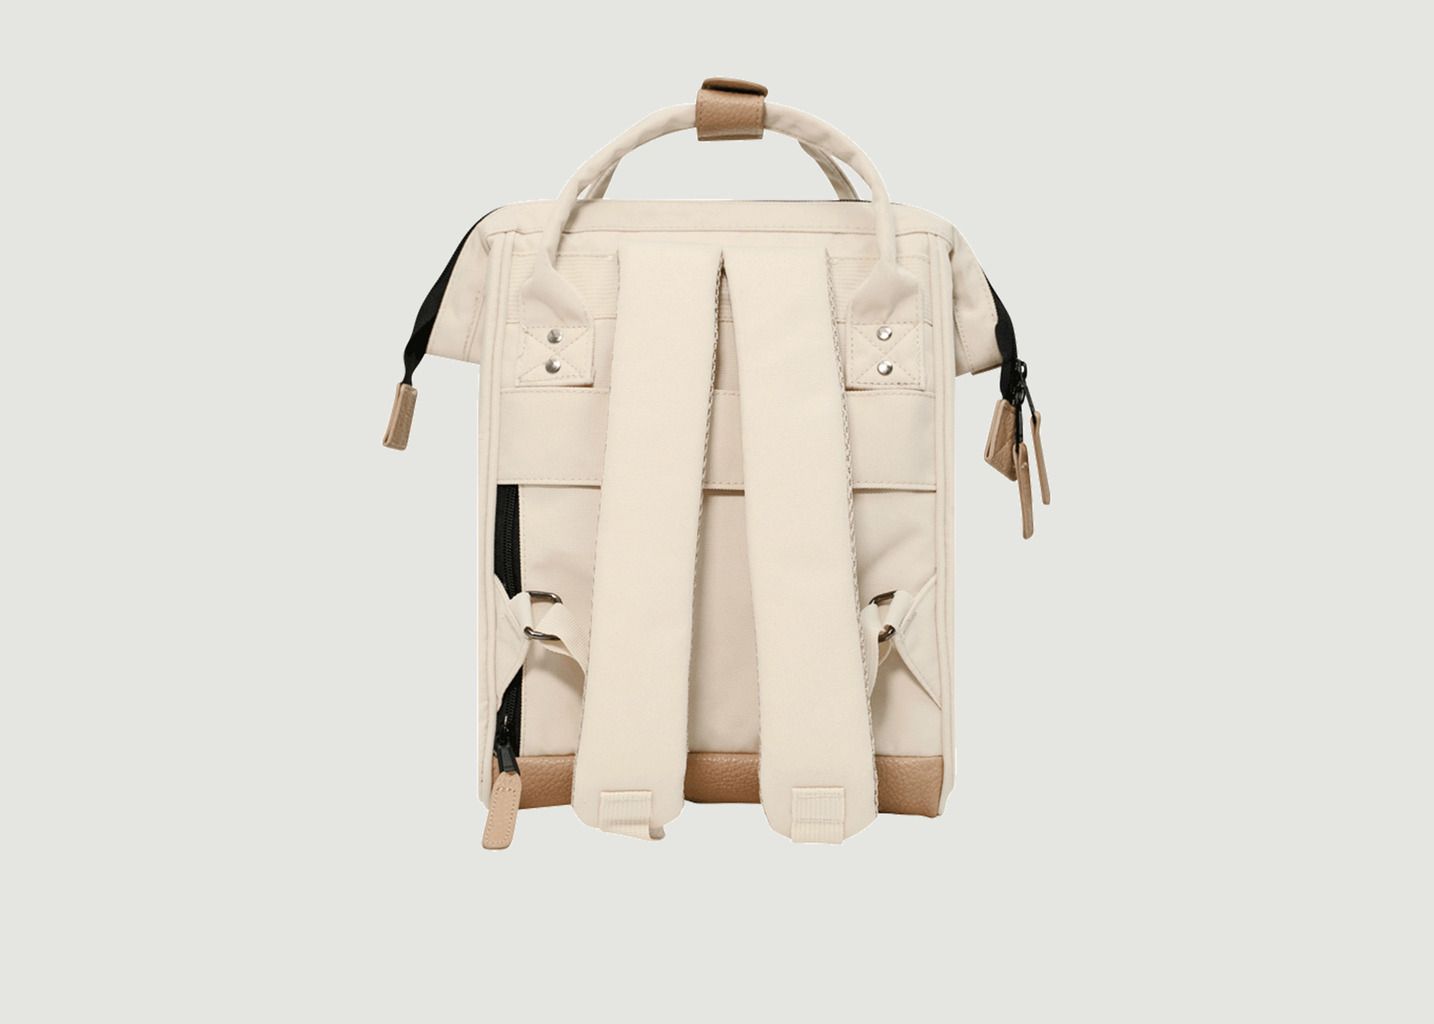 Cap-Town backpack with 2 pockets - Cabaïa